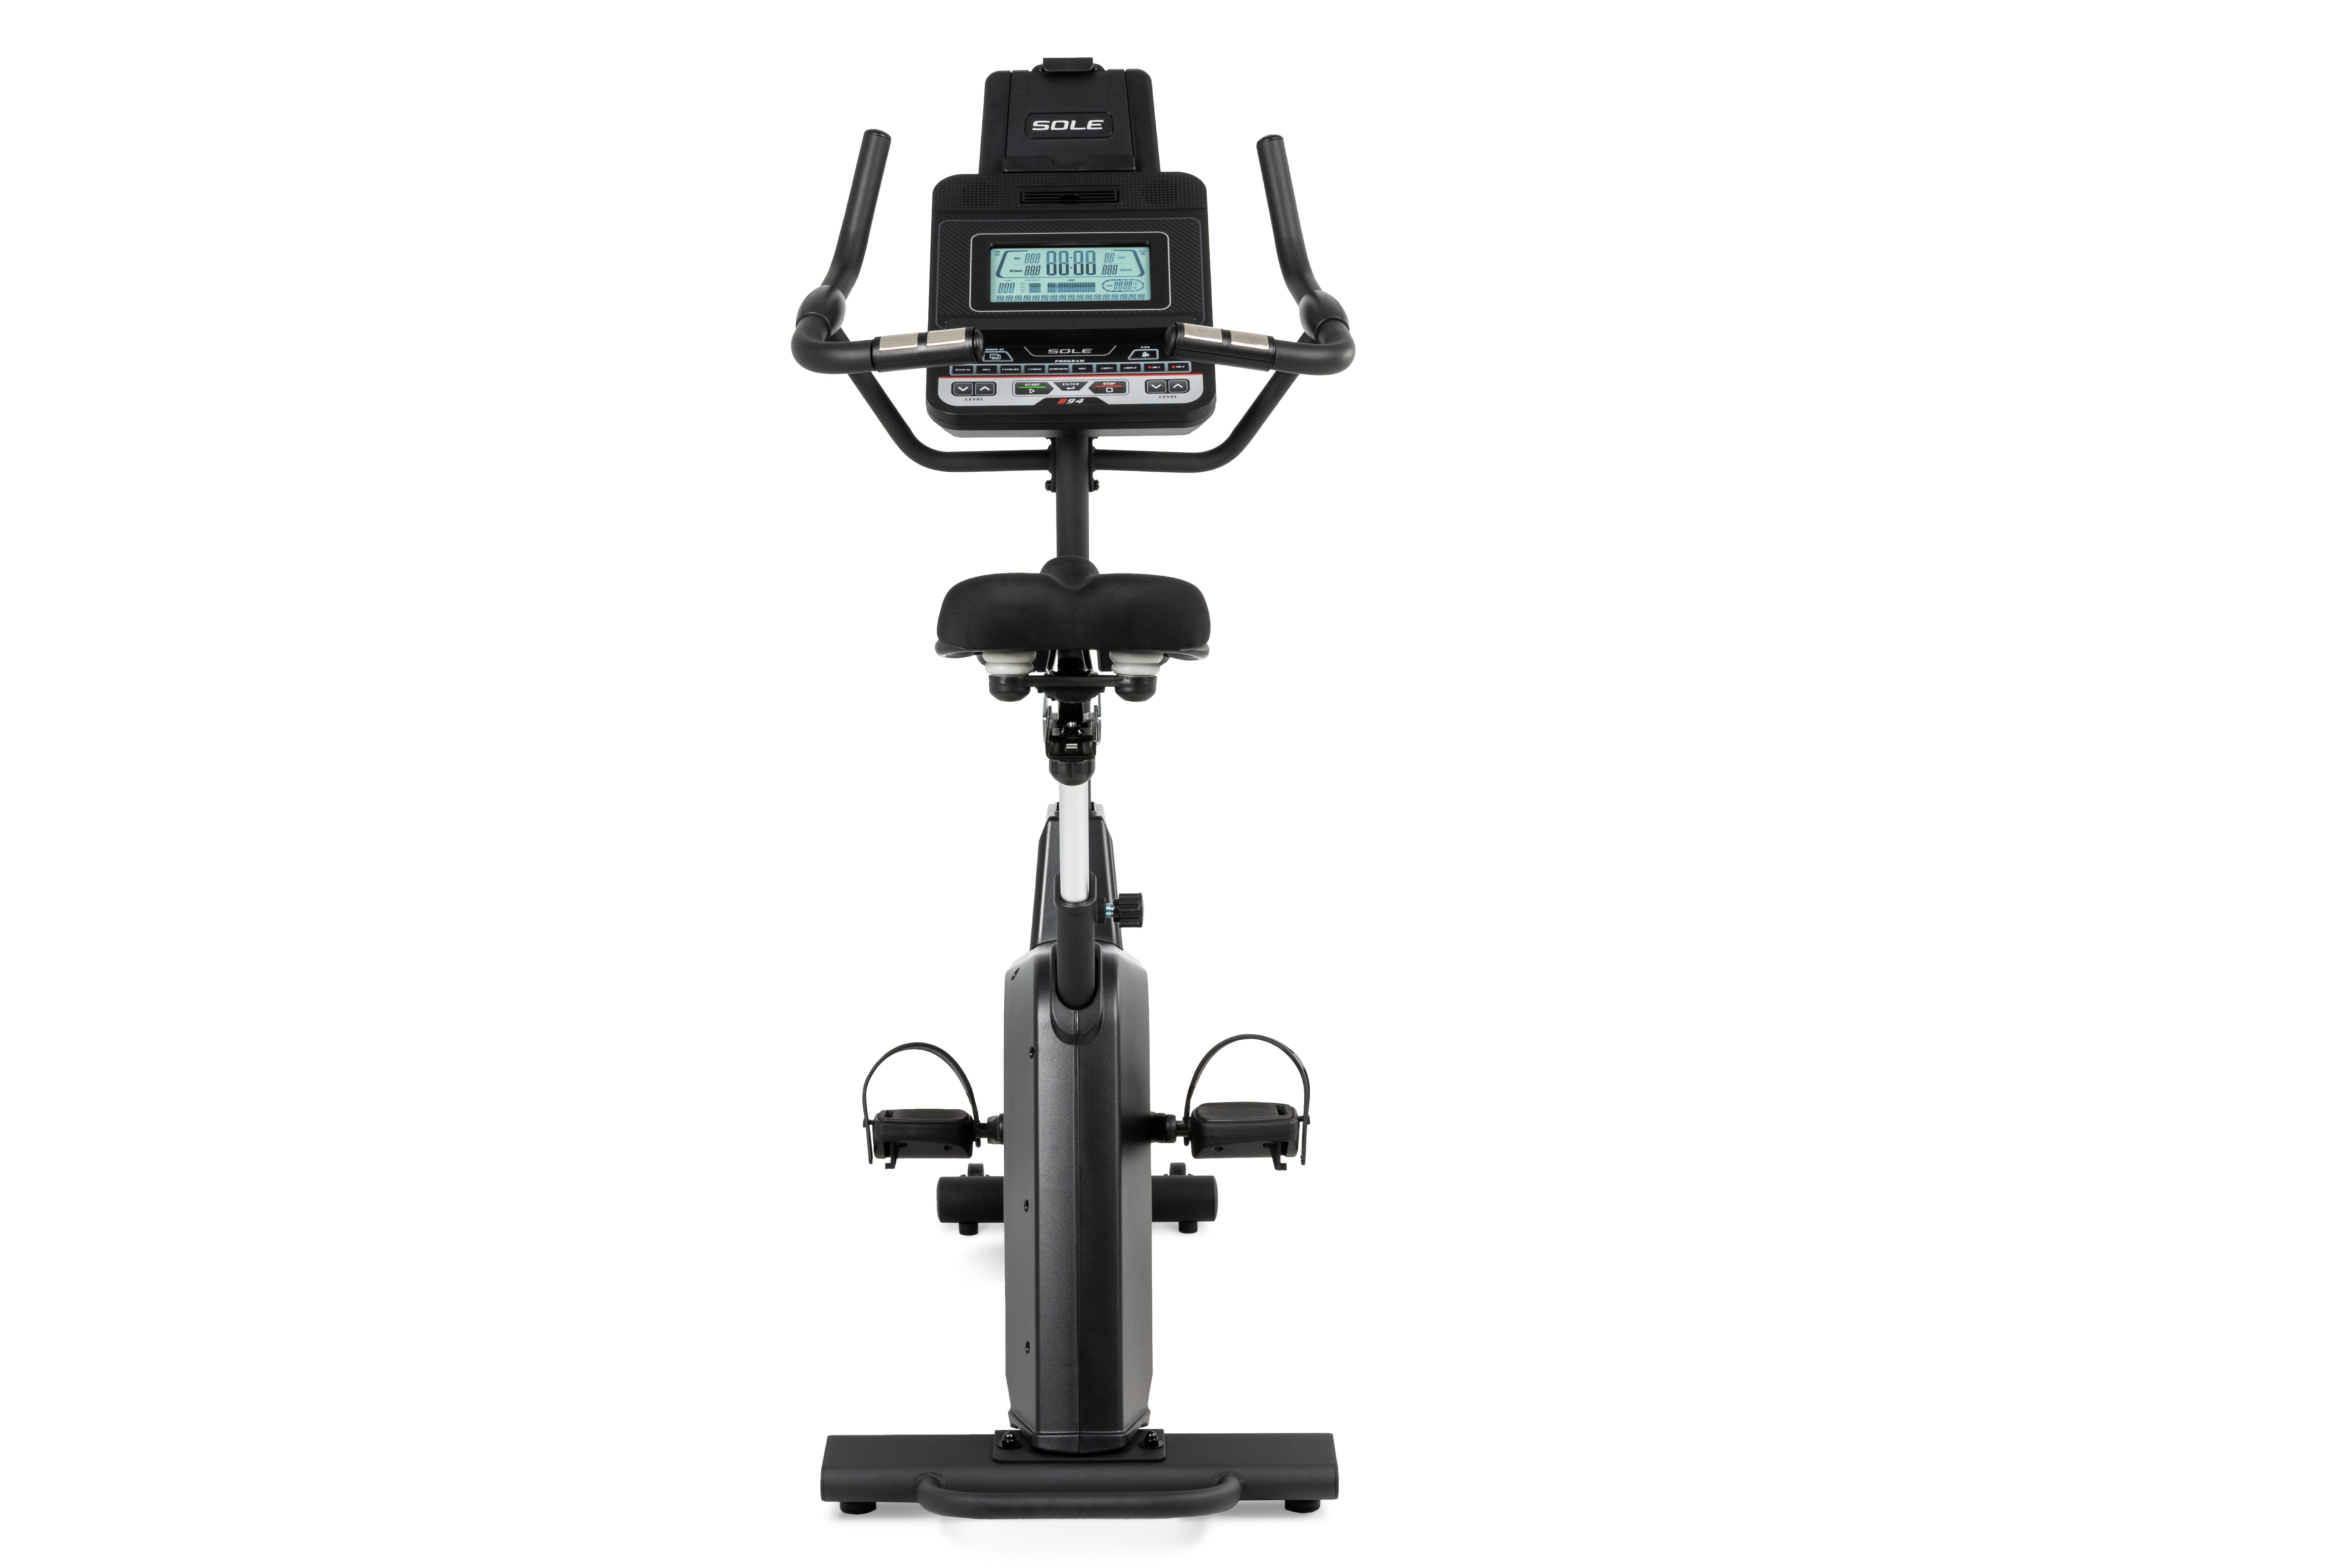 Front view of the Sole B94 stationary bike showcasing its digital console displaying workout metrics, ergonomic handlebars, adjustable padded seat, and sleek gray body with foot pedals.